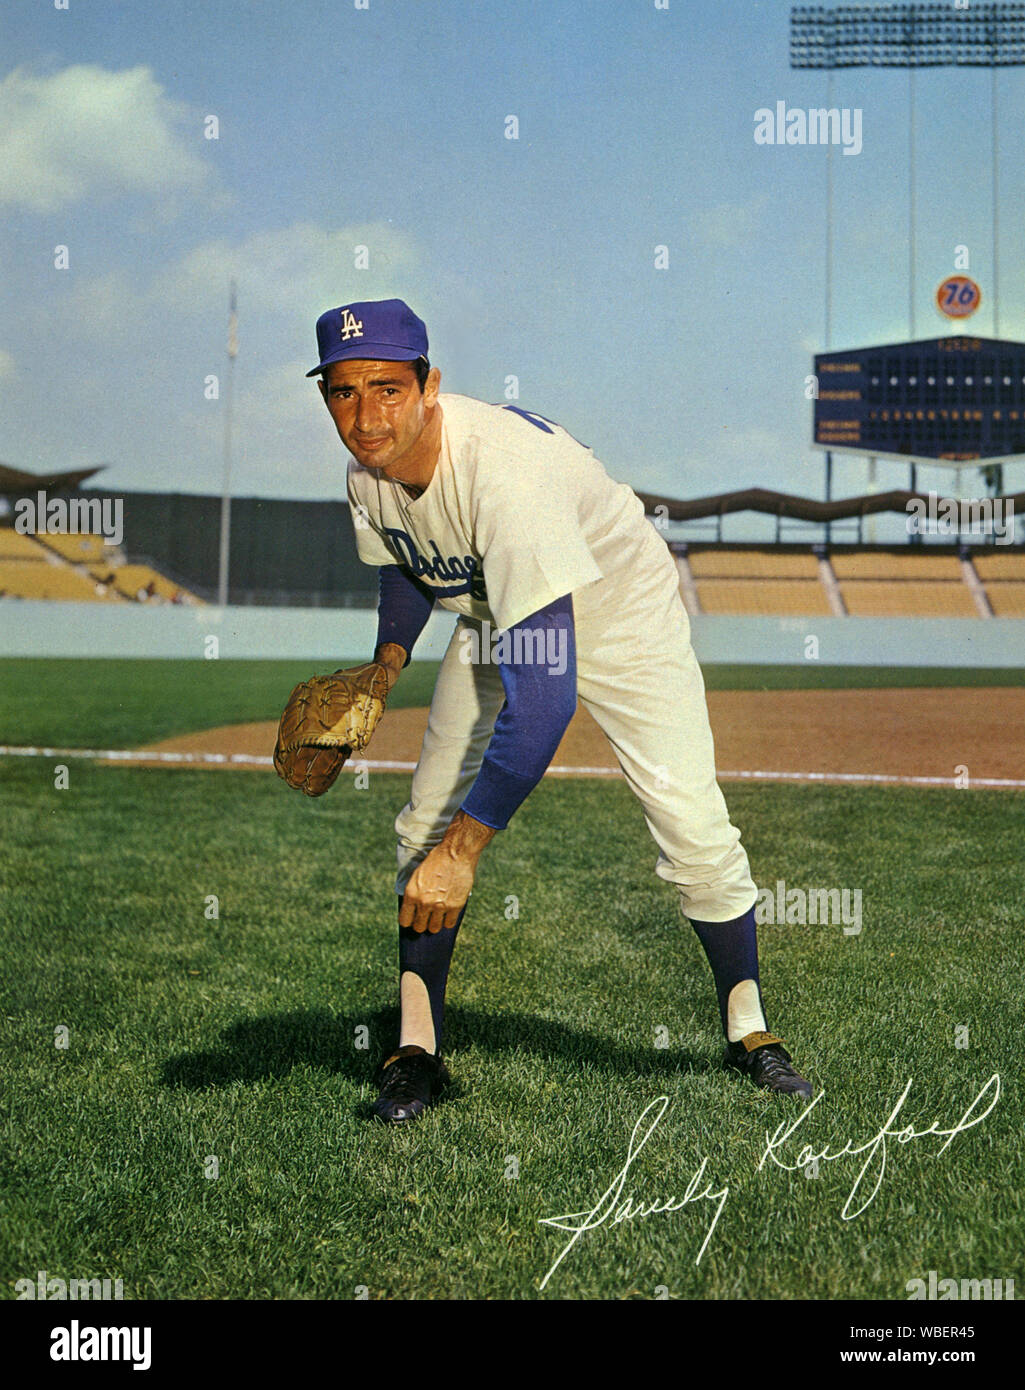 Sandy Koufax, the star pitcher  for the Los Angeles Dodgers throughout the 1960s poses for a souvenir photo on the field of the newly opened Dodger Stadium circa 1962. Stock Photo